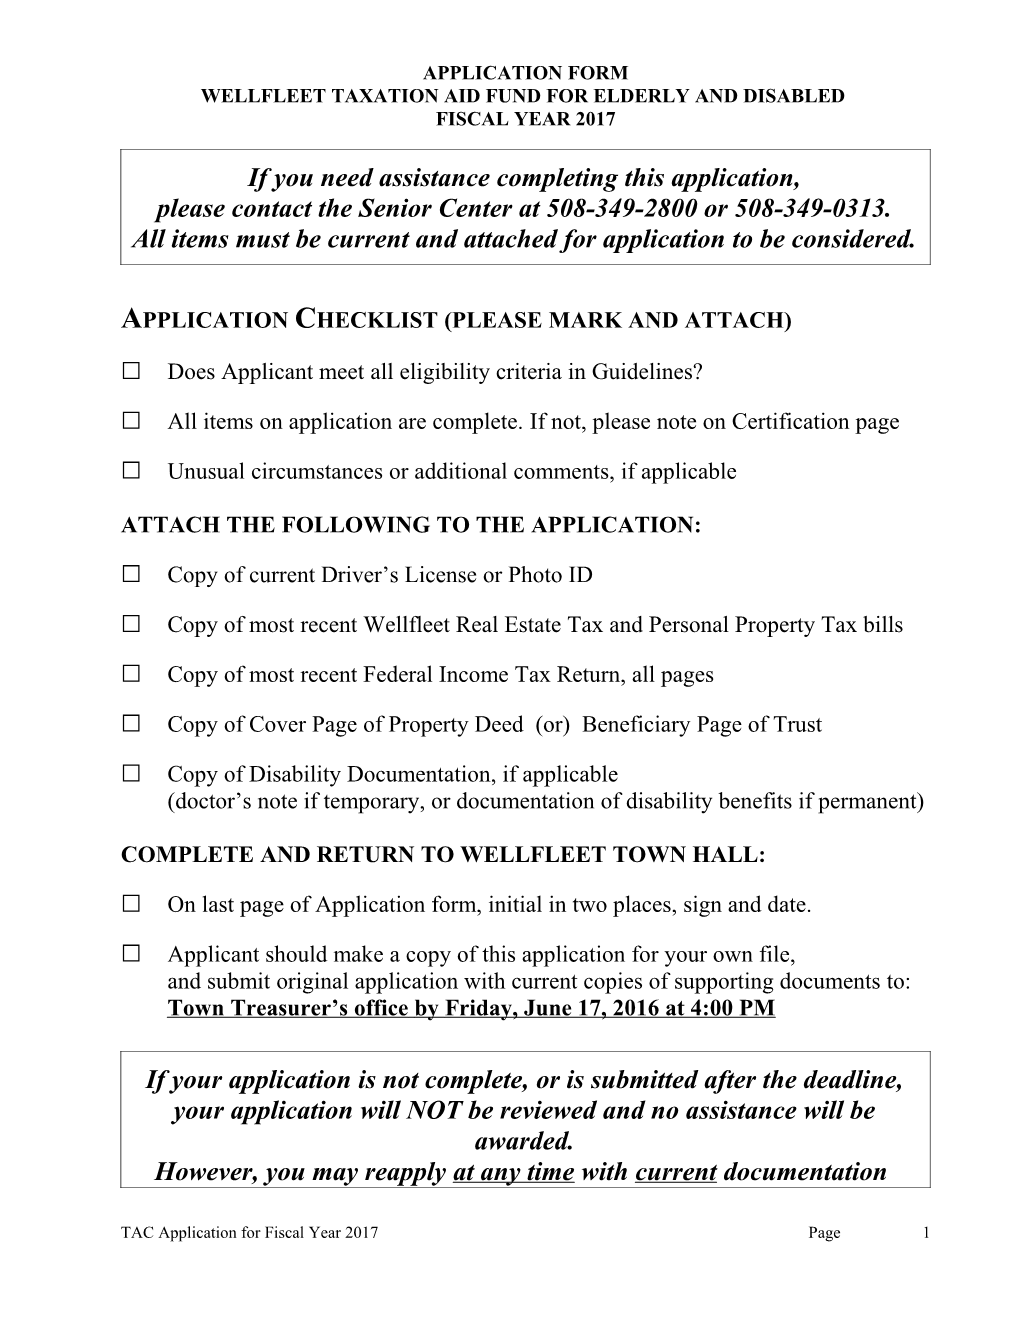 Wellfleet Taxation Aid Fund for Elderly and Disabled